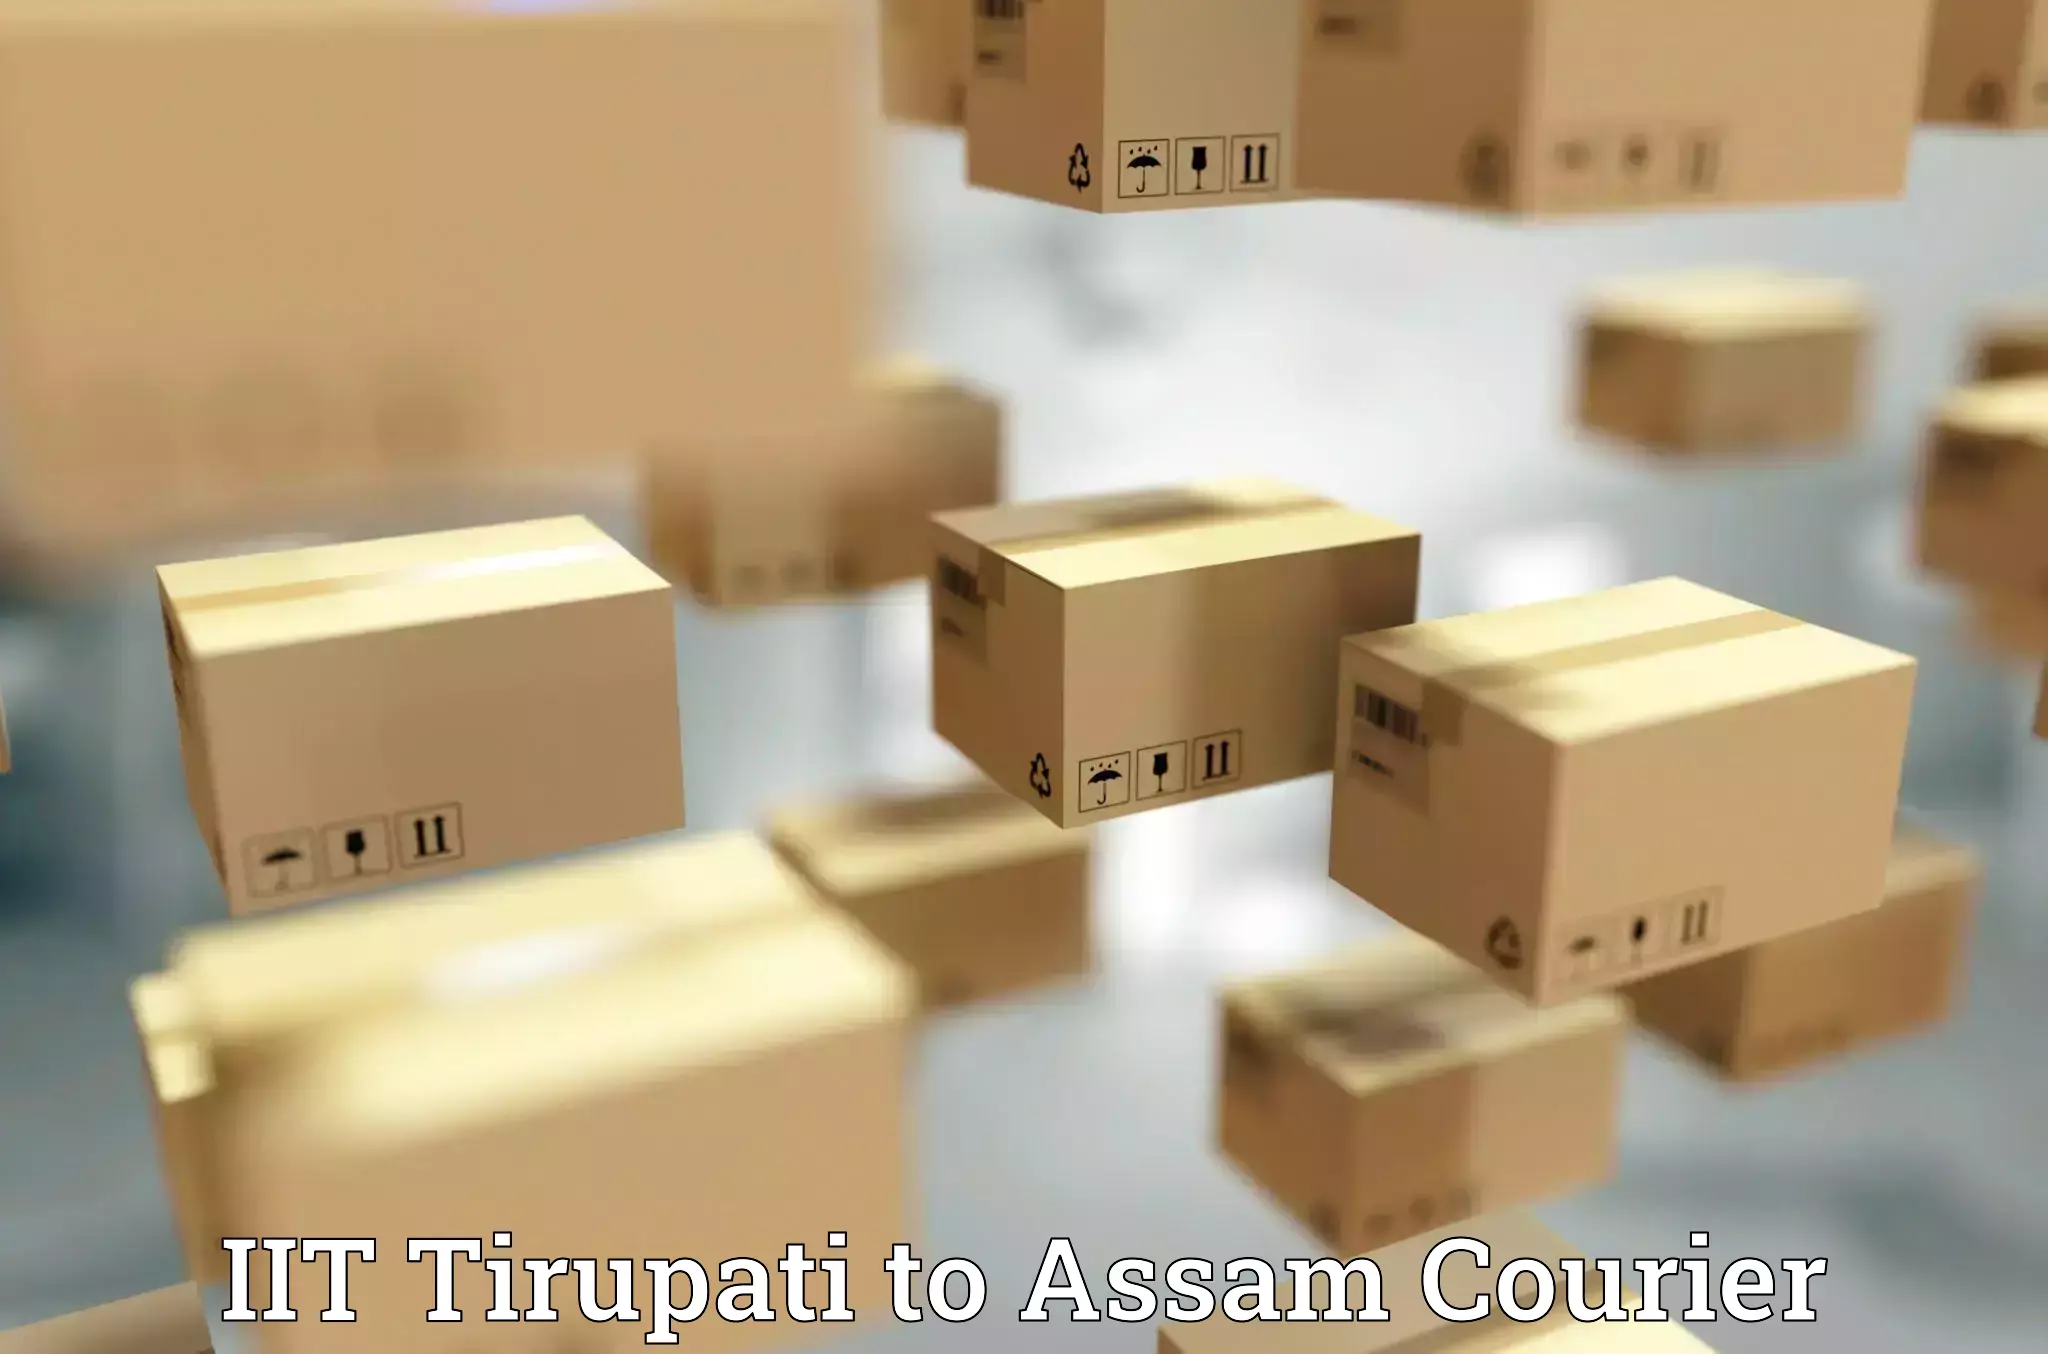 Business delivery service IIT Tirupati to Assam